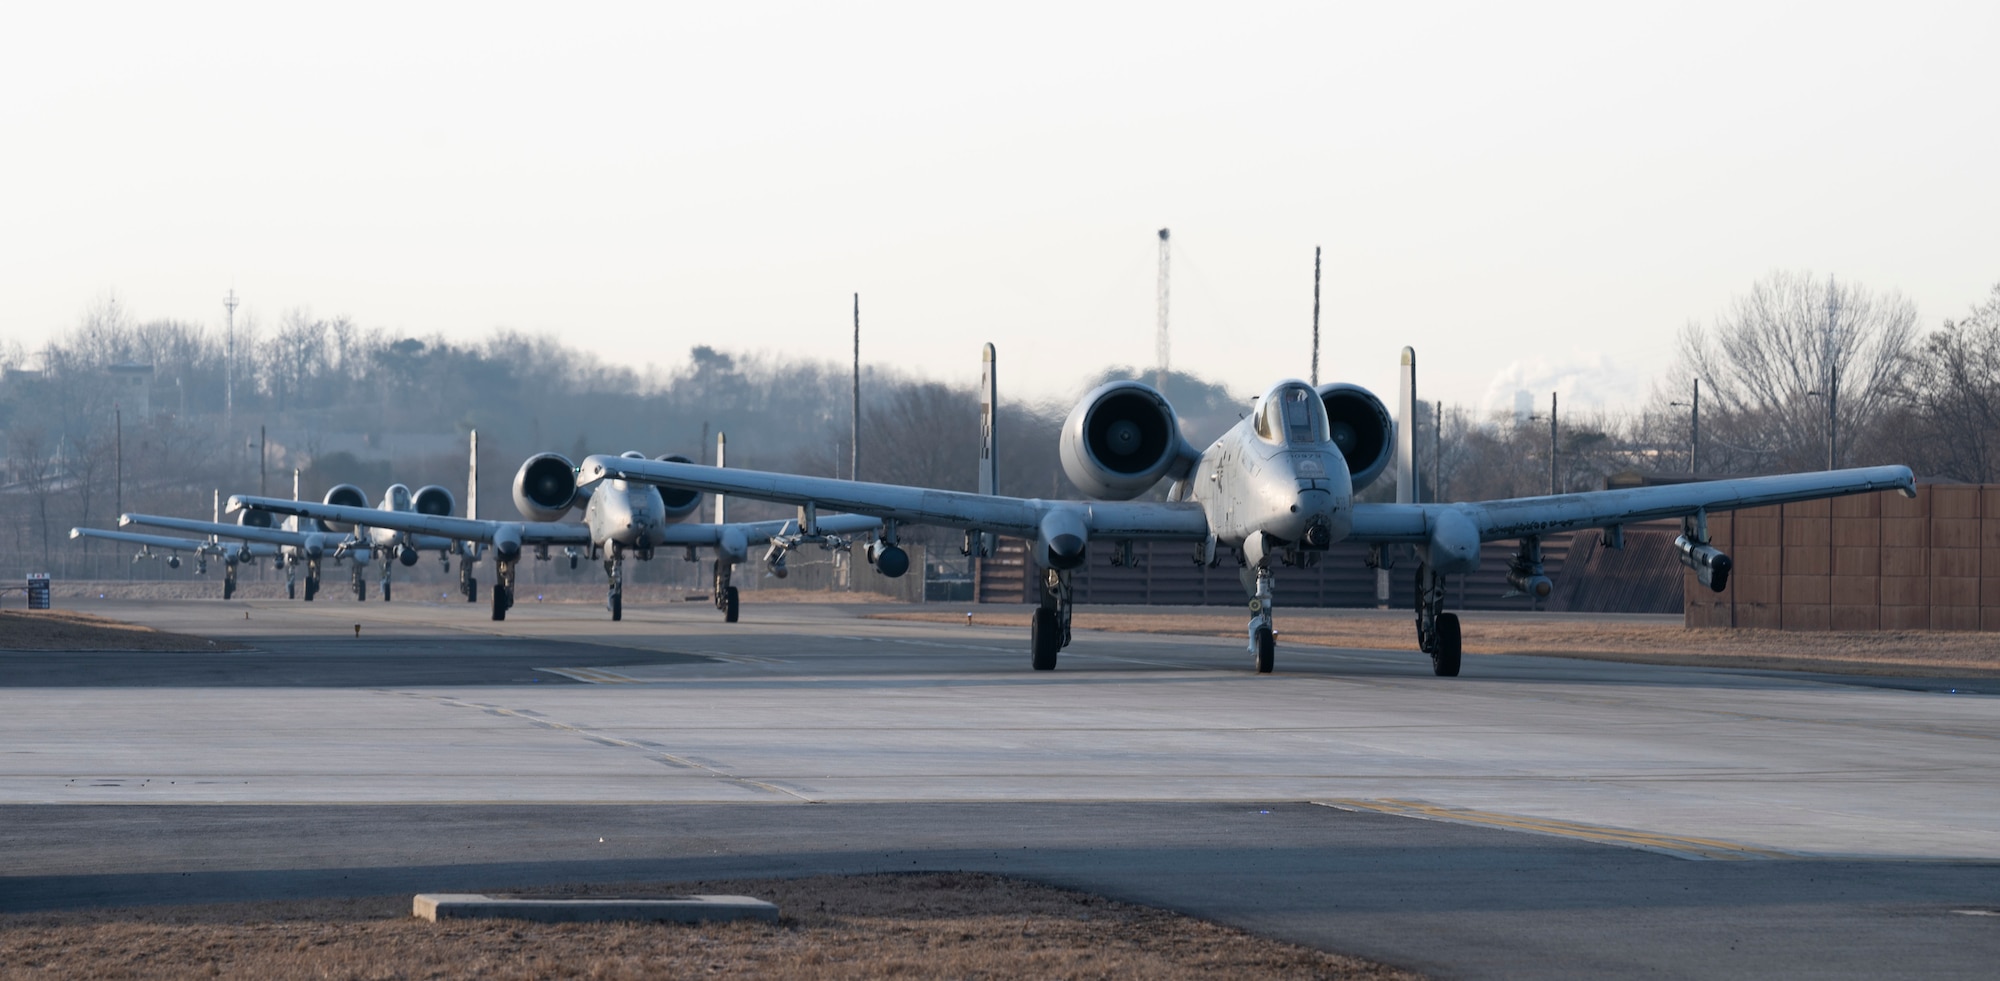 U.S. Air Force A-10C Thunderbolt IIs assigned to the 25th Fighter Squadron taxi on the flightline as part of a training event at Osan Air Base, Republic of Korea, Jan. 31, 2023.